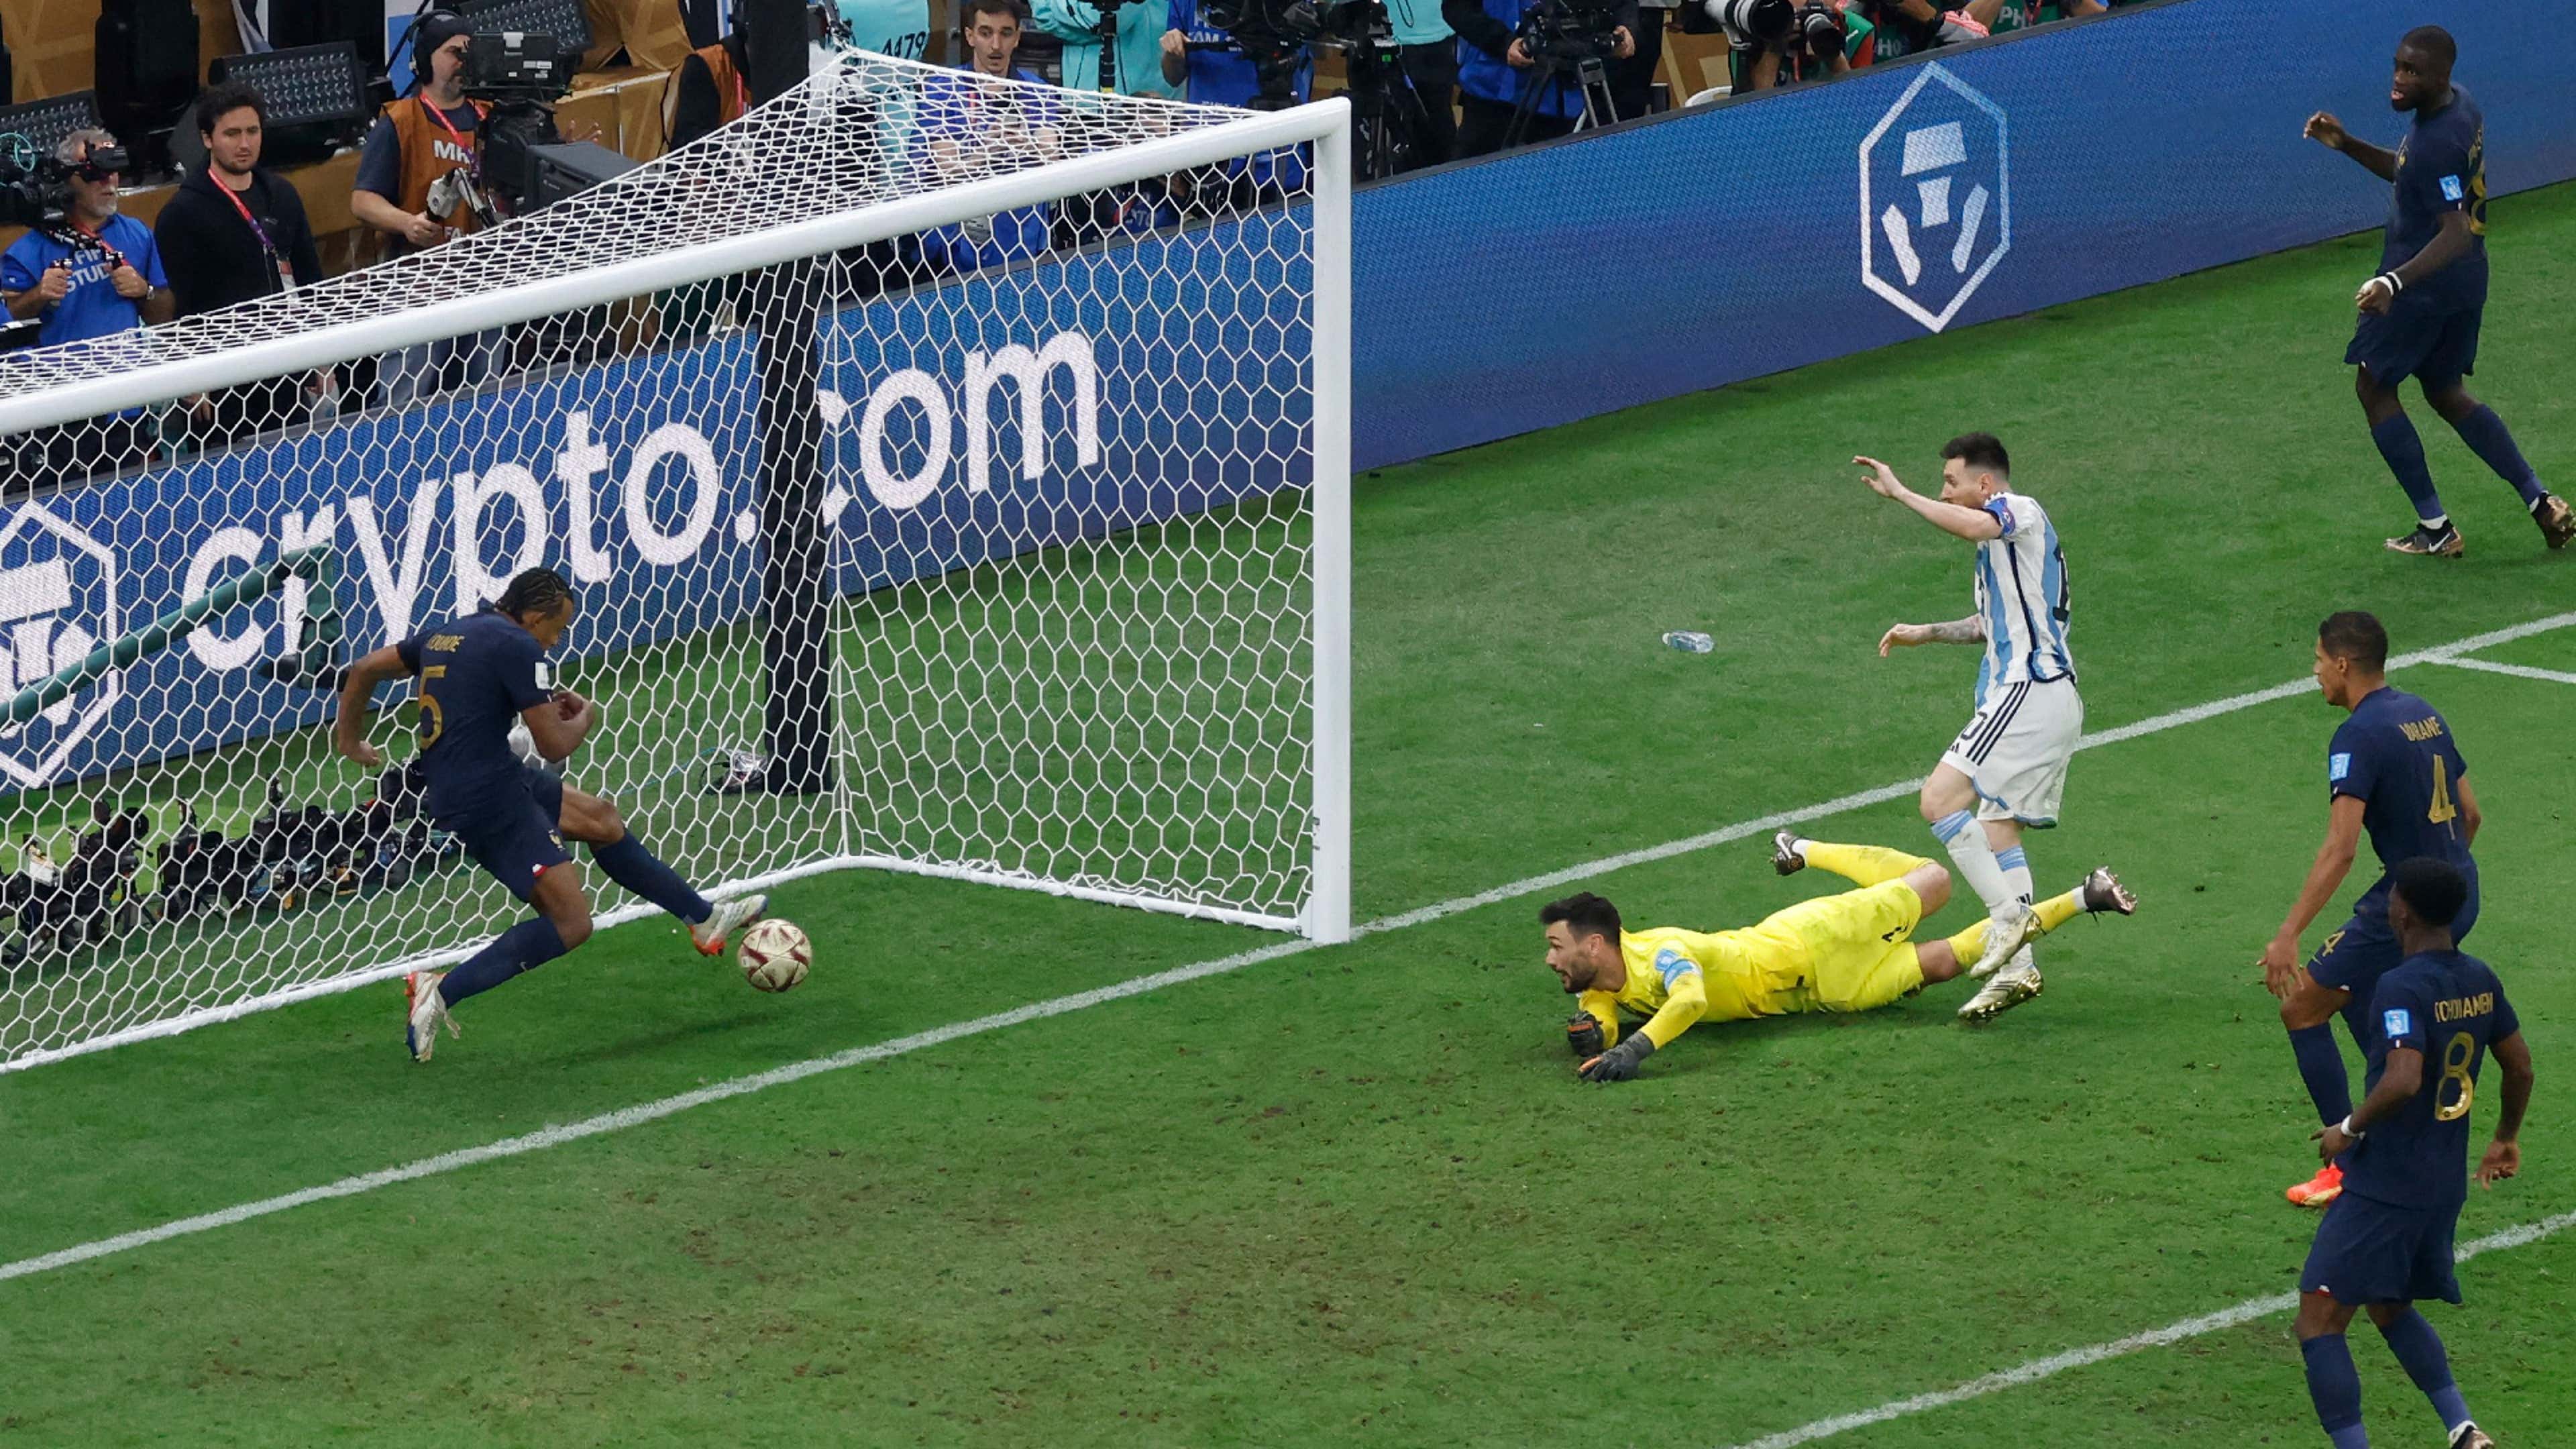 Why Lionel Messi World Cup final goal for Argentina vs France was checked  by VAR in extra time 